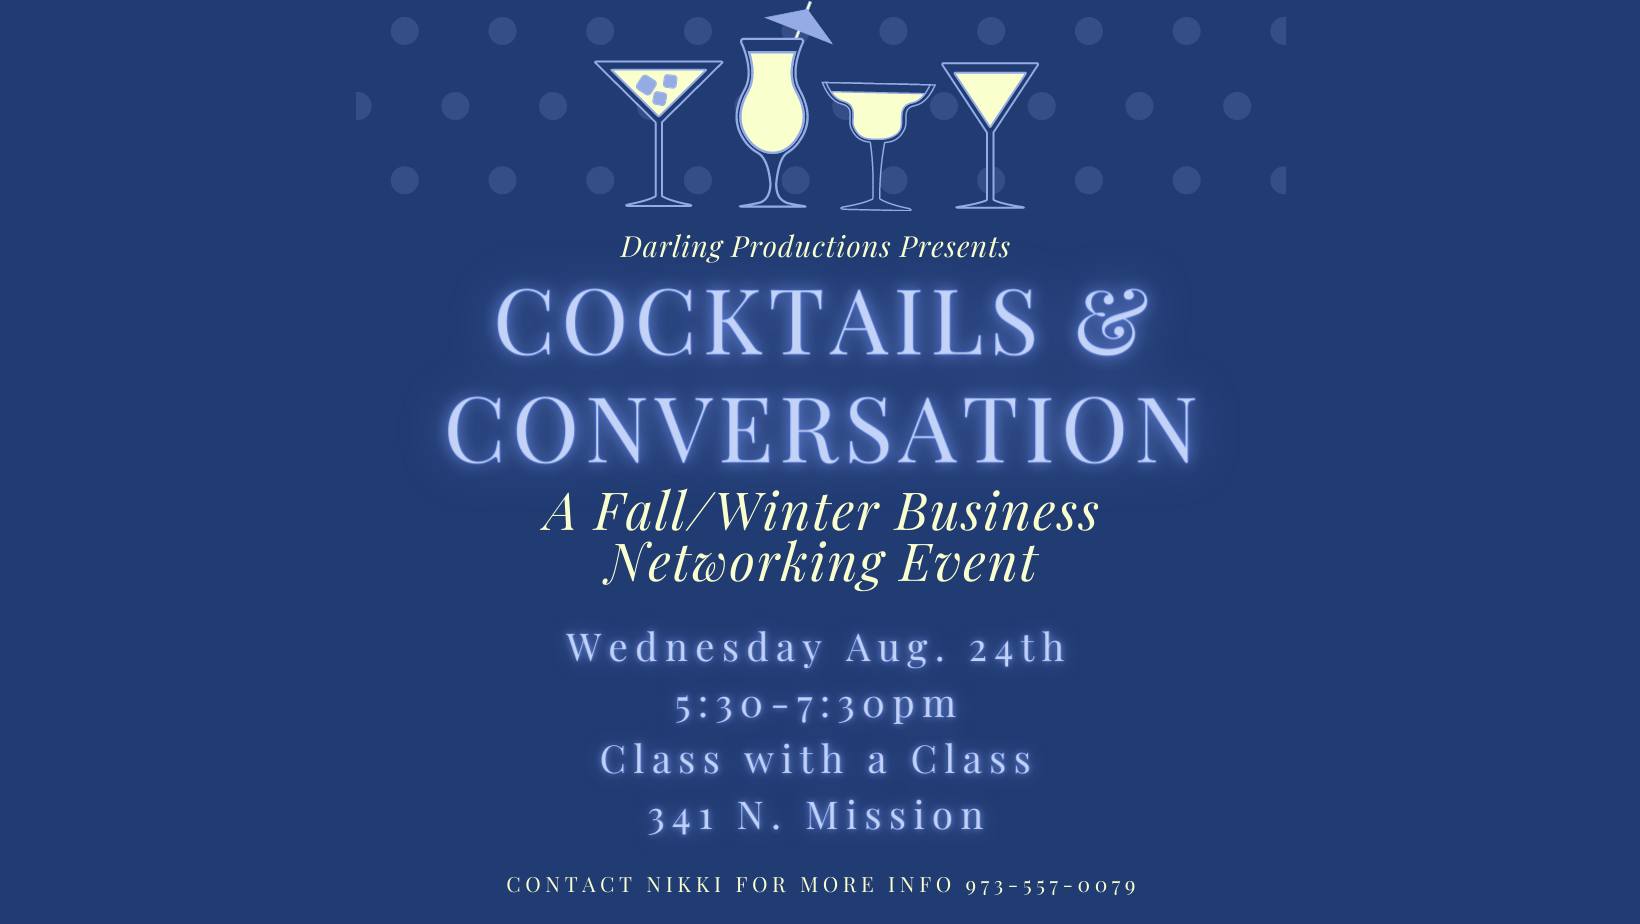 <h1 class="tribe-events-single-event-title">Cocktails & Conversation: A Fall/Winter Business Networking Event</h1>